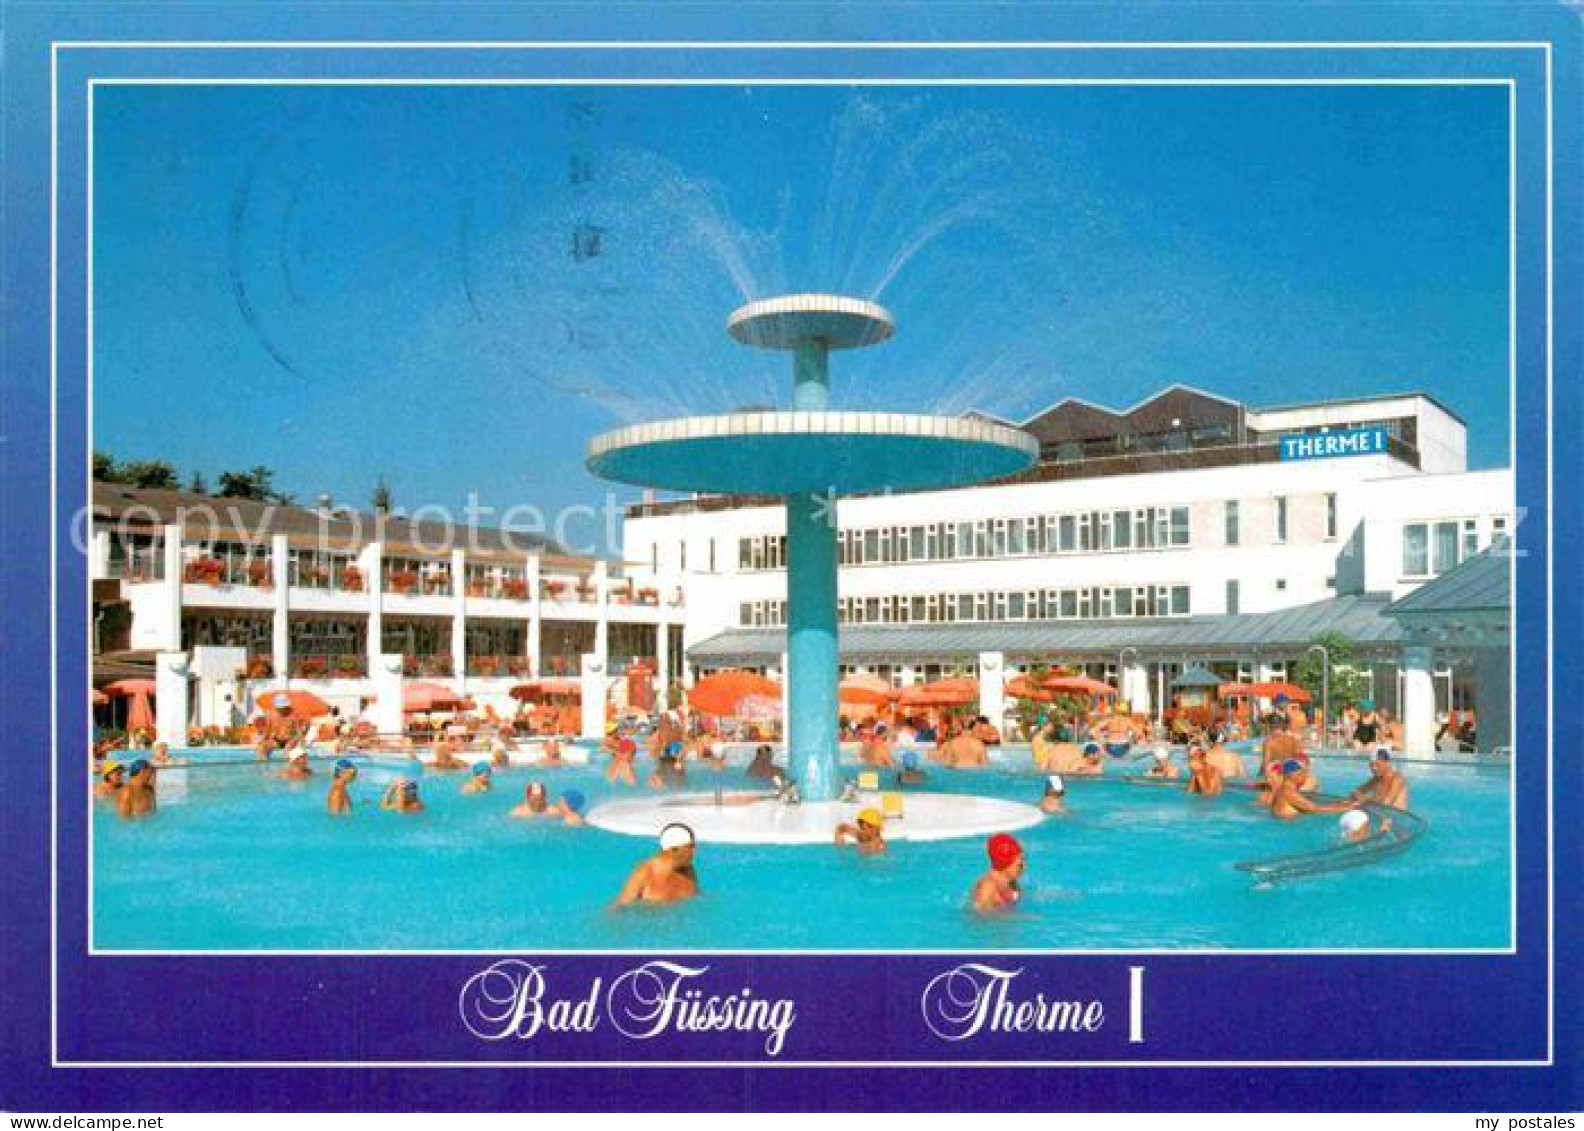 72885751 Bad Fuessing Therme Thermalbad Mineralheilquelle Aigen - Bad Fuessing